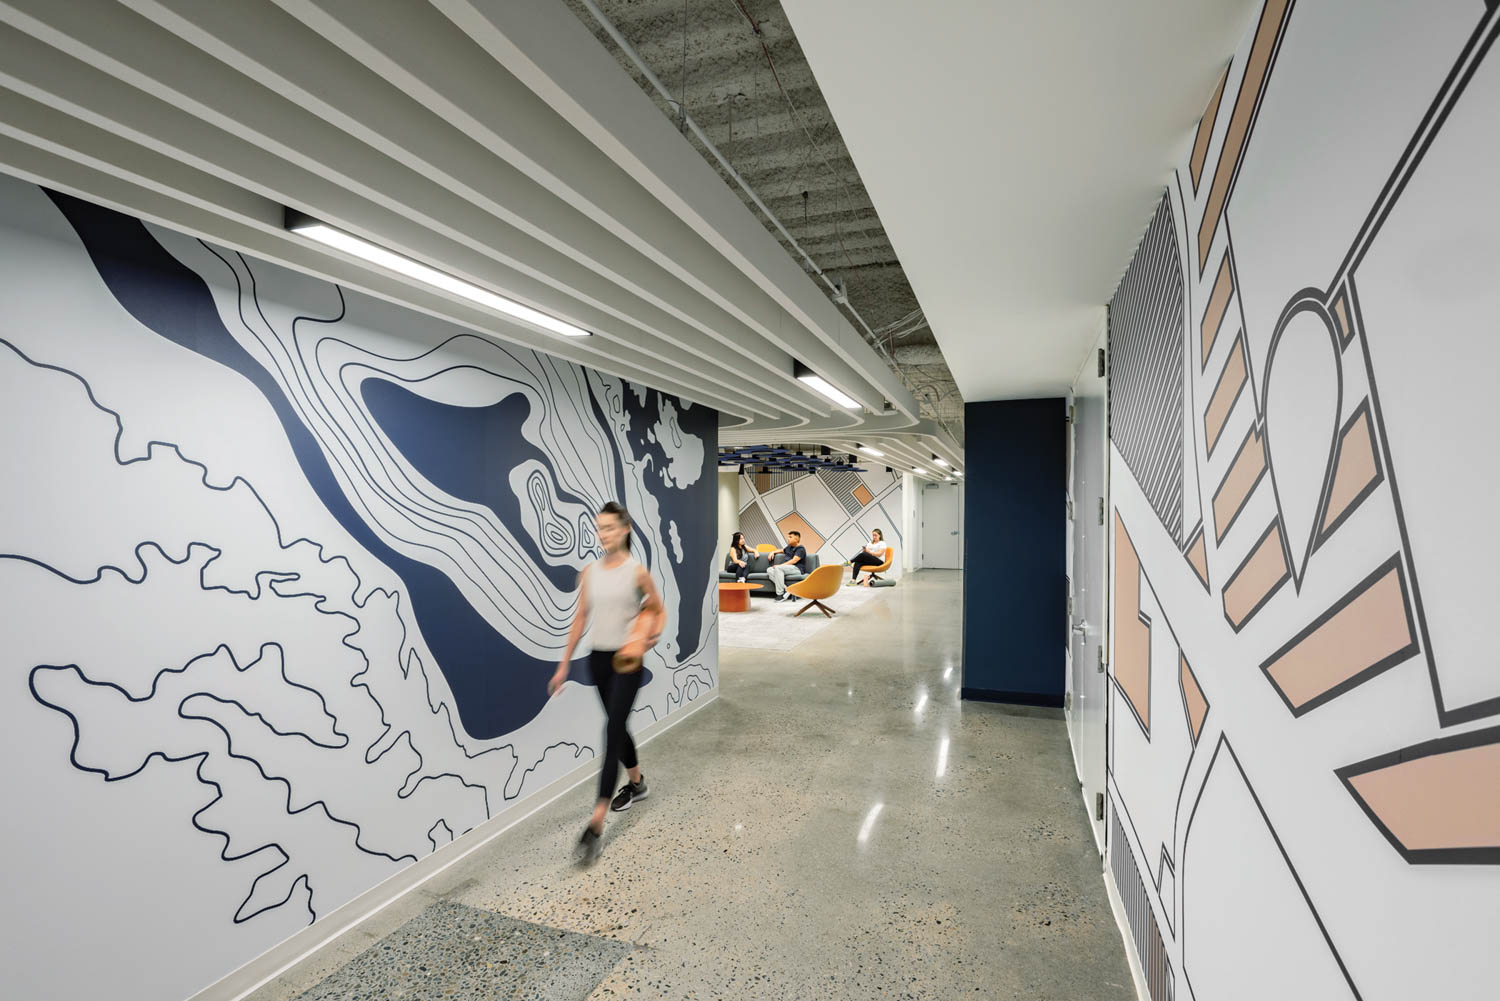 A person walks down a hallways in Santa Clara Towers with a mural on the wall